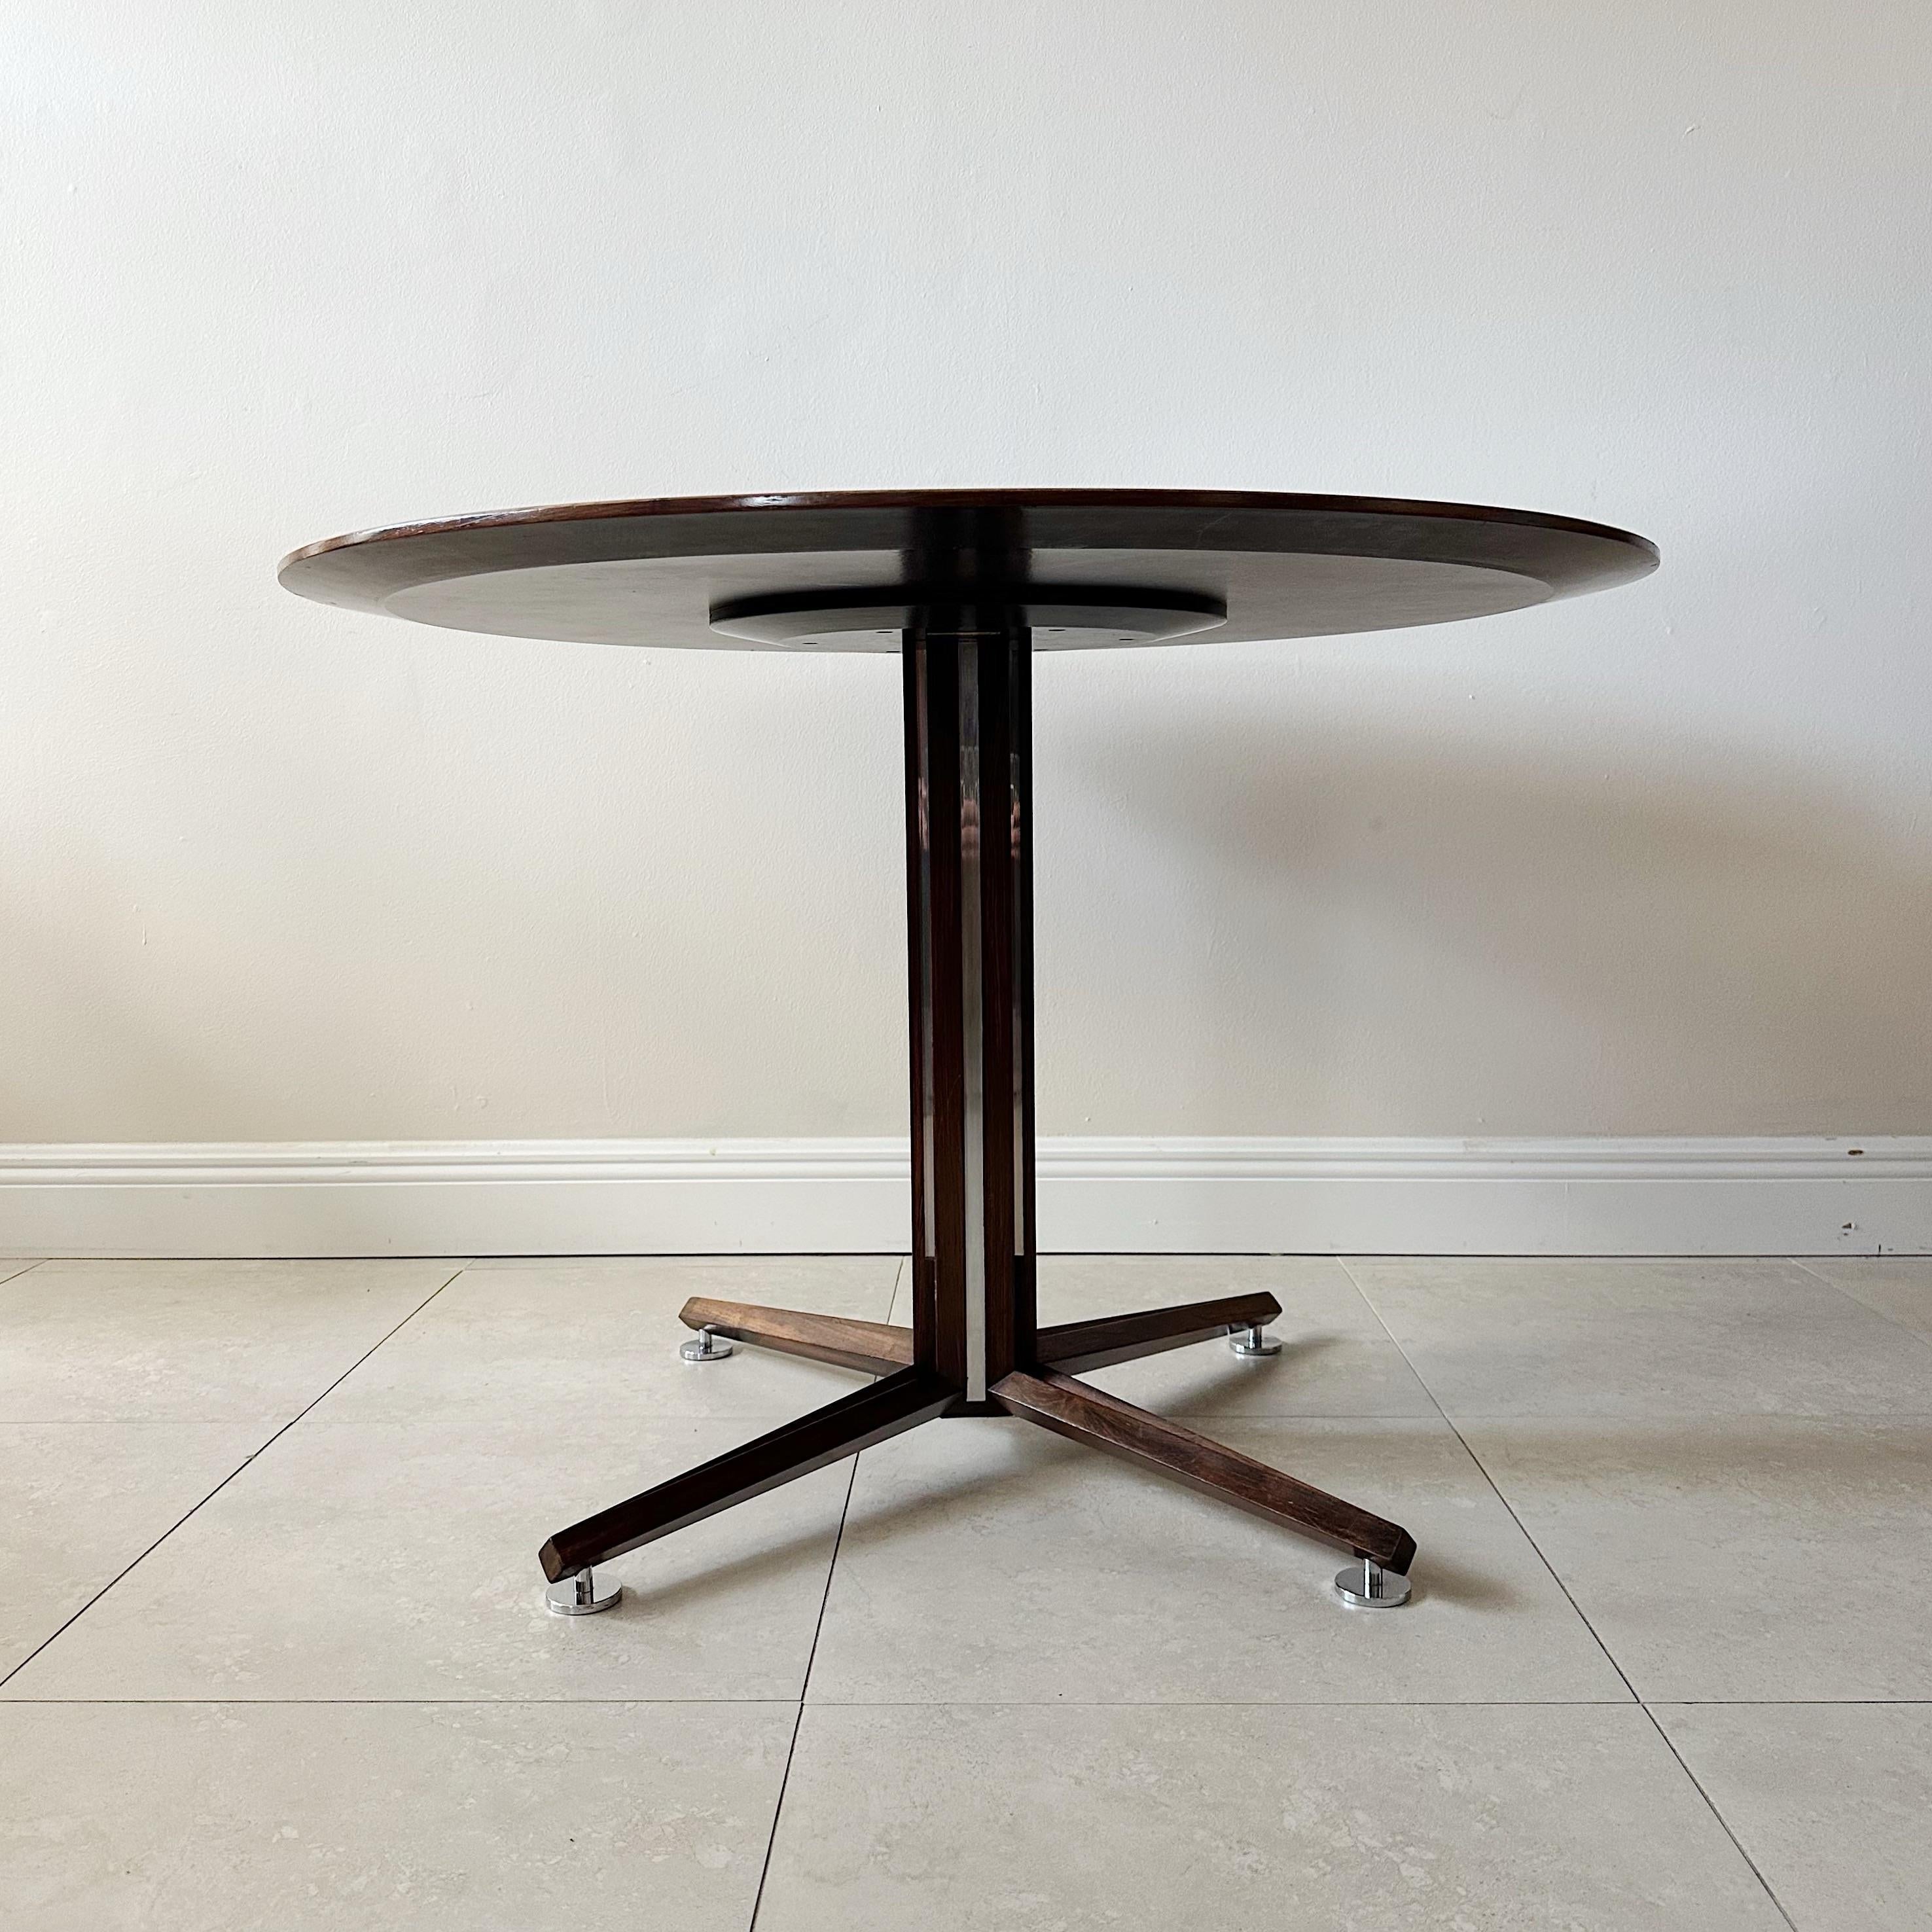 Edward Wormley for Dunbar rosewood, chrome and black laminate top center round table from the 1960s. Strips of chrome are inset in the pedestal with chrome round pod feet. The top is a black laminate with minor surface wear light scratches from age